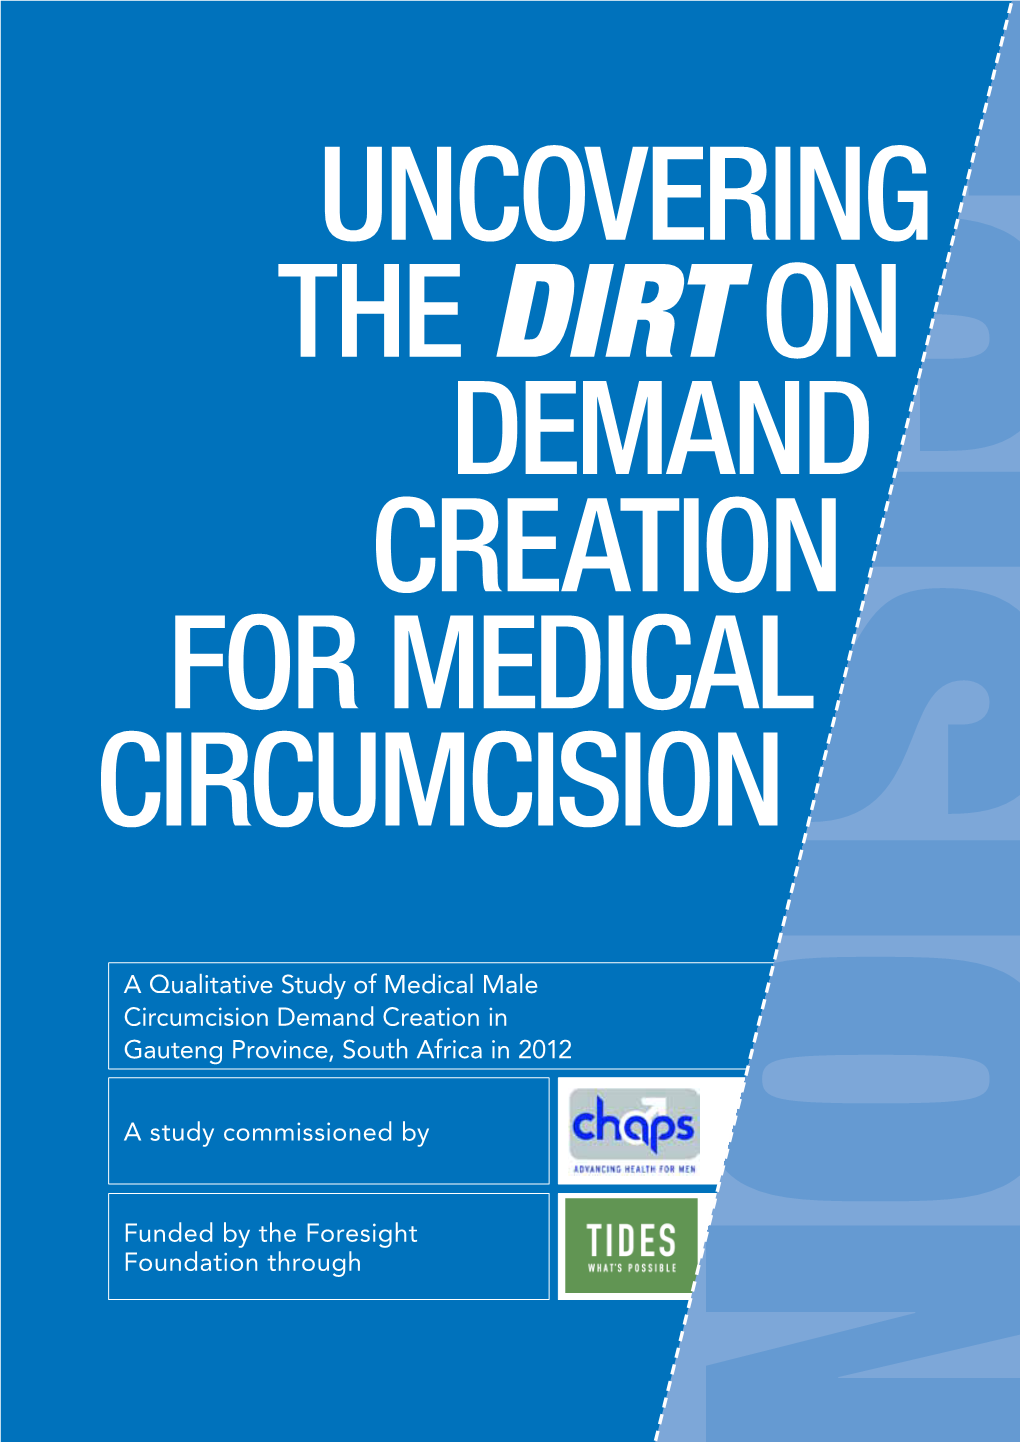 A Qualitative Study of Medical Male Circumcision Demand Creation in Gauteng Province, South Africa in 2012